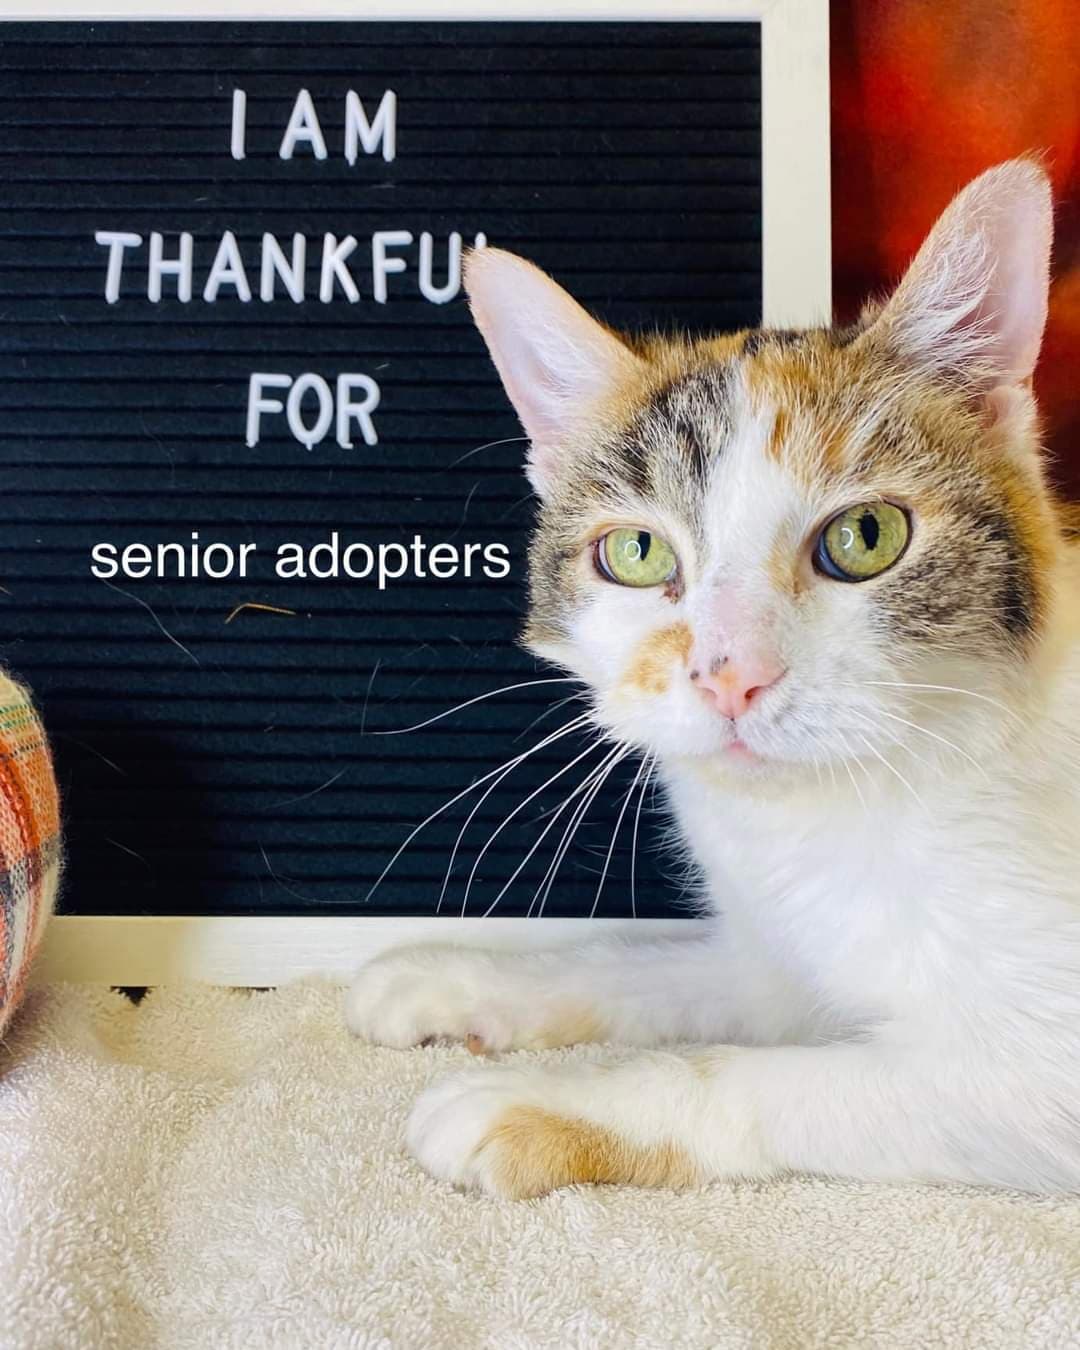 Wanda is thankful for those who adopt senior pets! Although she is still currently waiting for her family to come scoop her up! She reminds cheerful and hopeful that soon one day her chance will come! Wanda has been with us for a total of 117 days.... 117 long days of waiting for someone to give her the love she so desperately deserves. Wanda is only 7 years old, she is up today on all her core vaccinations and she is already altered. She is a very sweet and talkative feline, who just wants love and affection! She would be so happy to relax with you on your lap for hours!! If you have room in your heart for one more sweet feline, please consider adopting today!! Wanda doesn’t want to stay here forever!! 💔 For more information please call! 740-314-5583